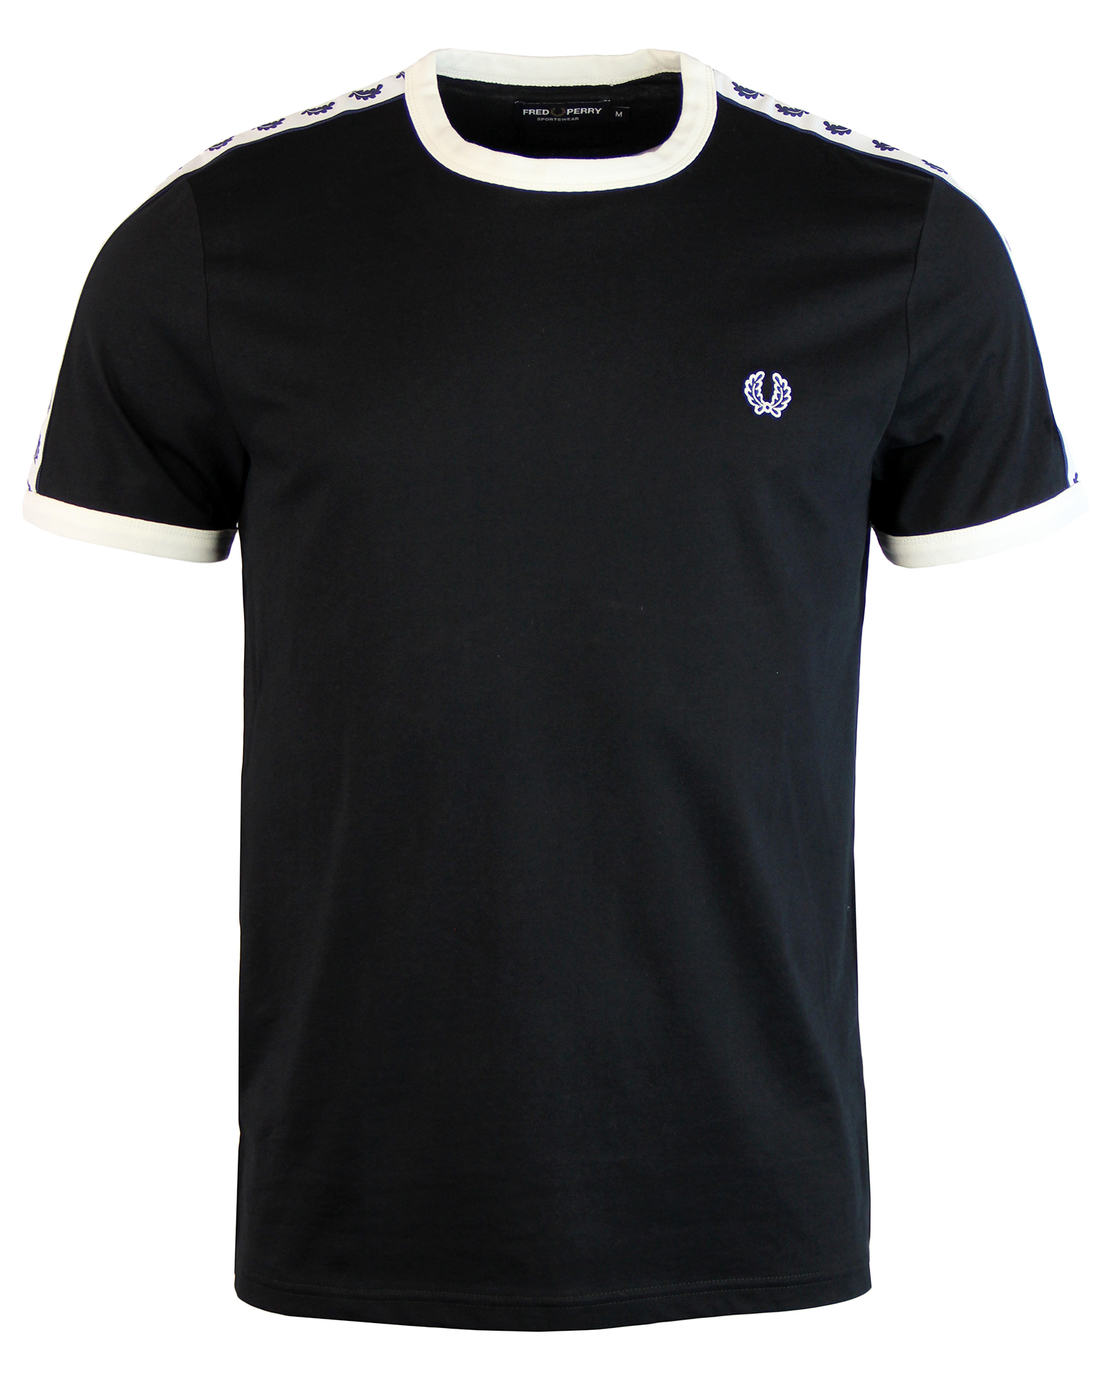 FRED PERRY Men's Retro Taped Sleeve Ringer Tee in Black